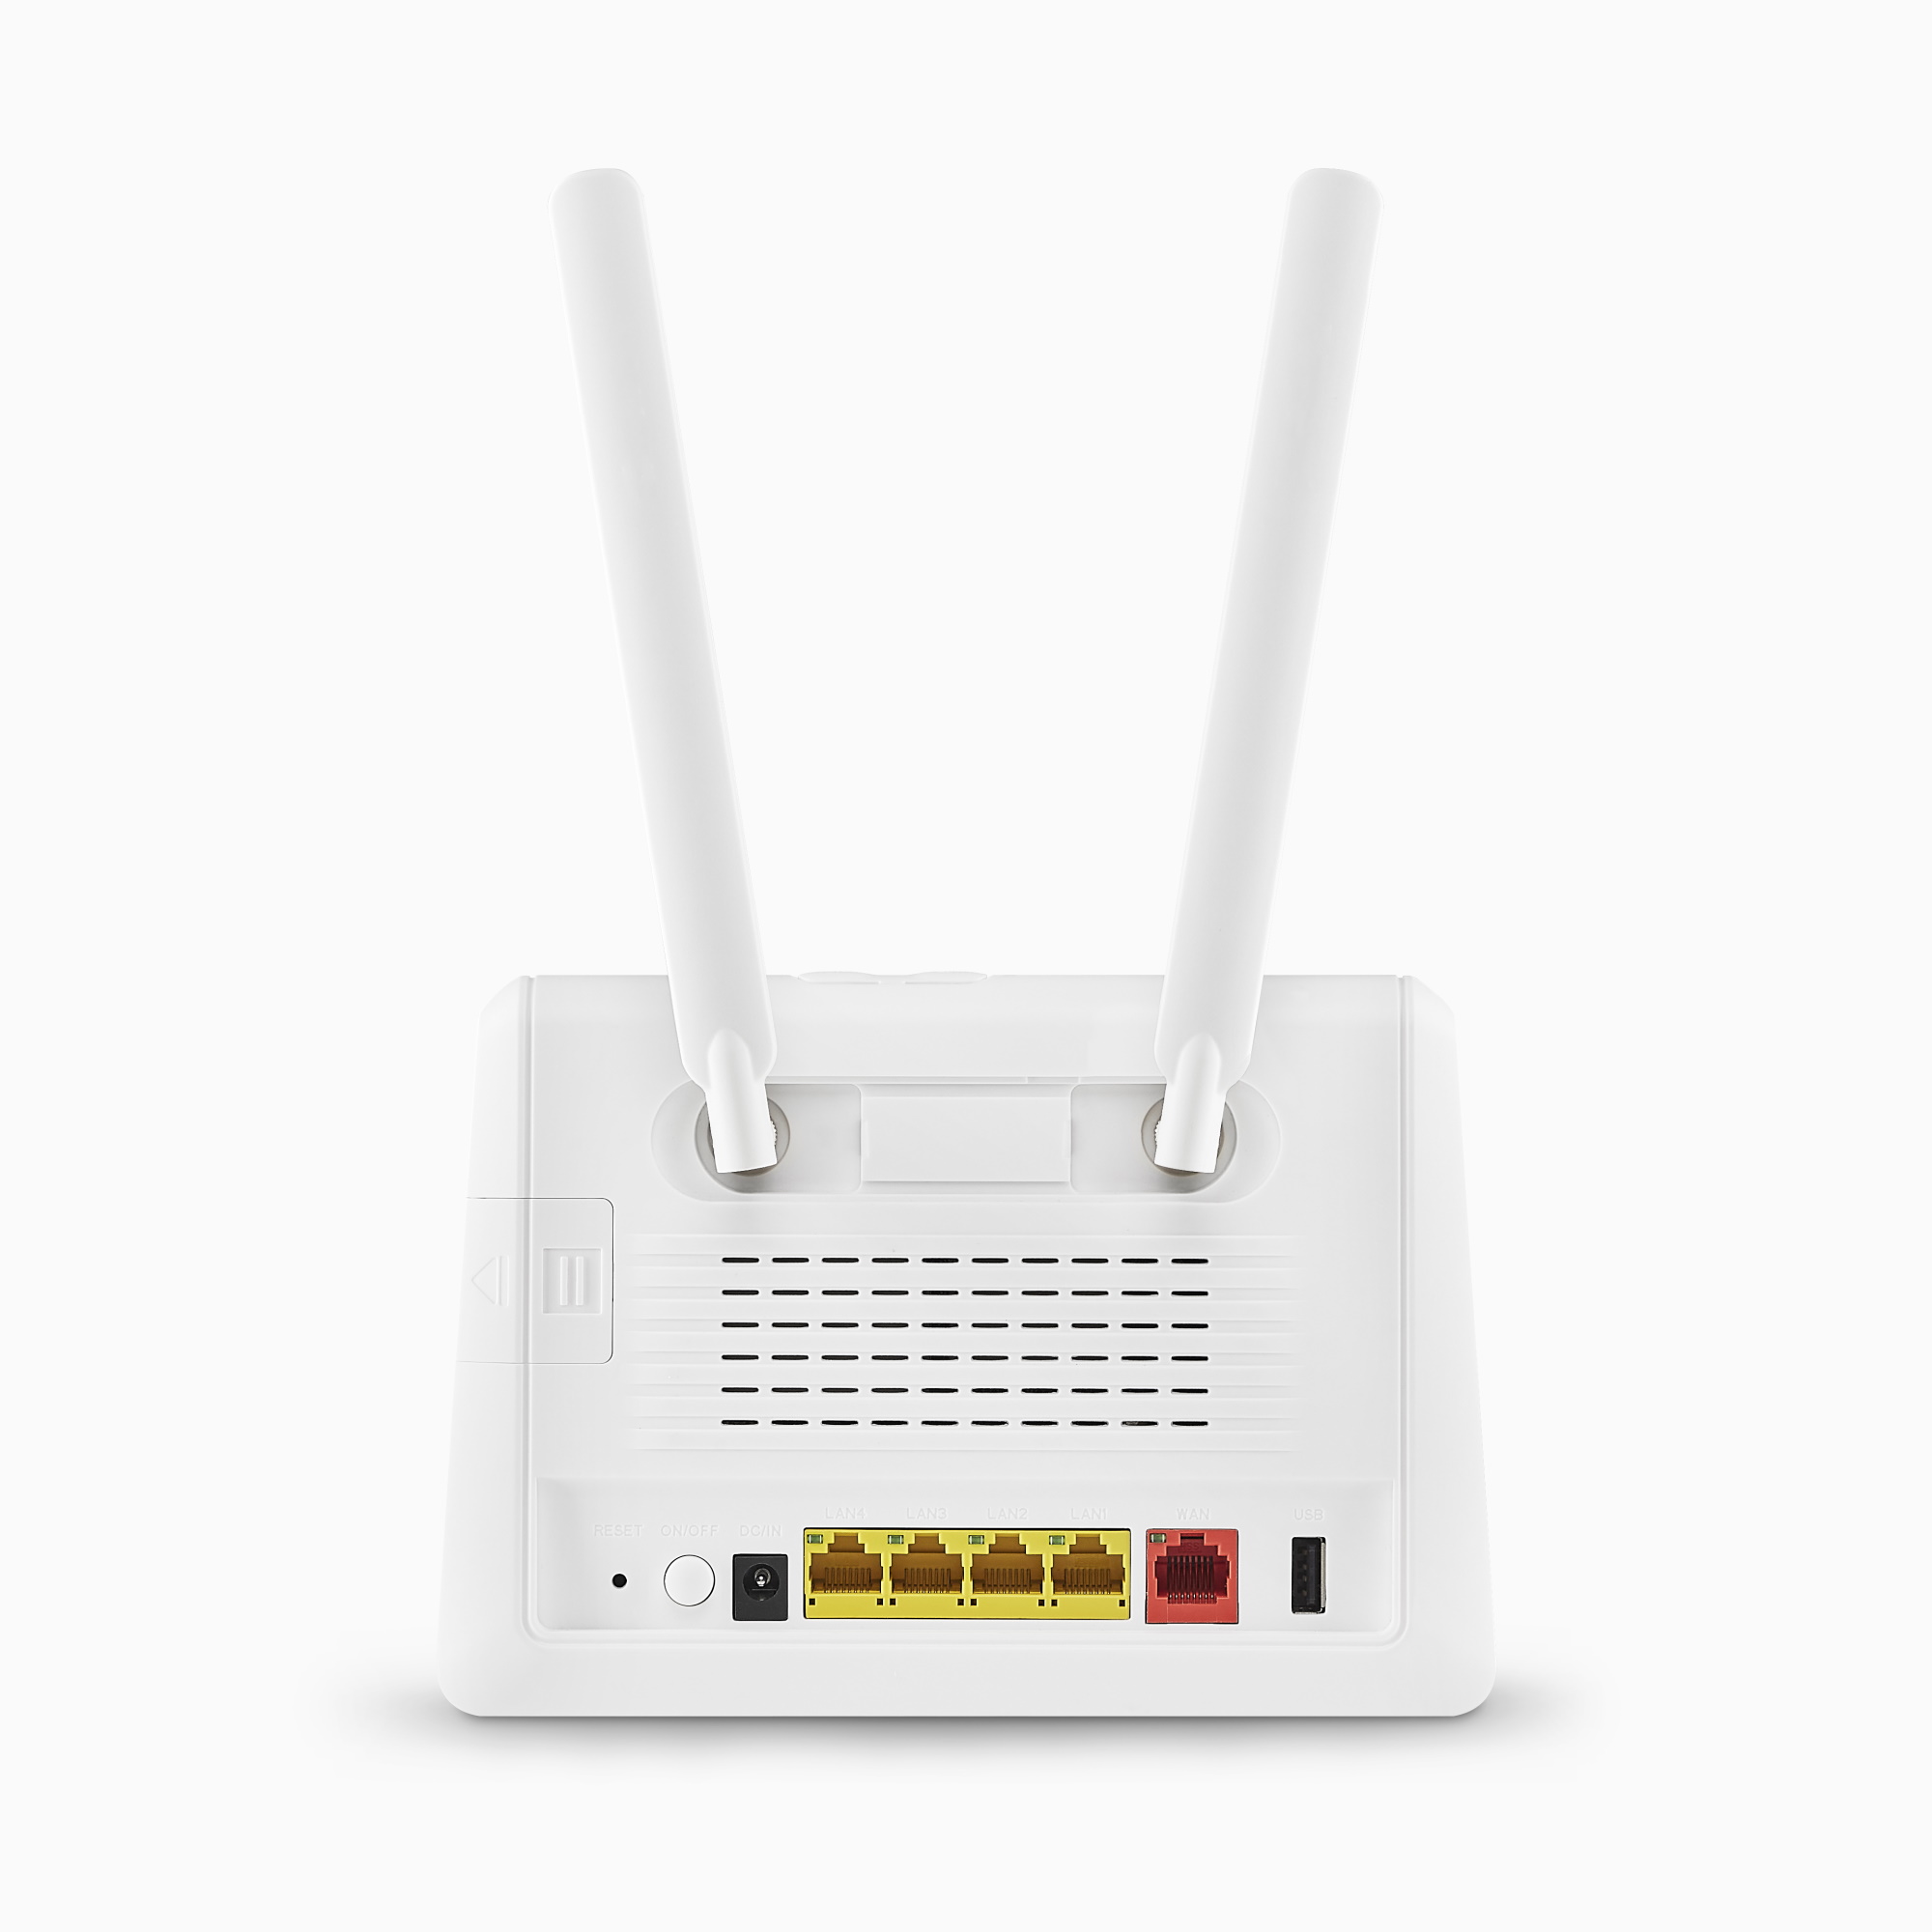 Prolink 4G LTE Unlimited Hotspot Wi-Fi Router with LAN ports